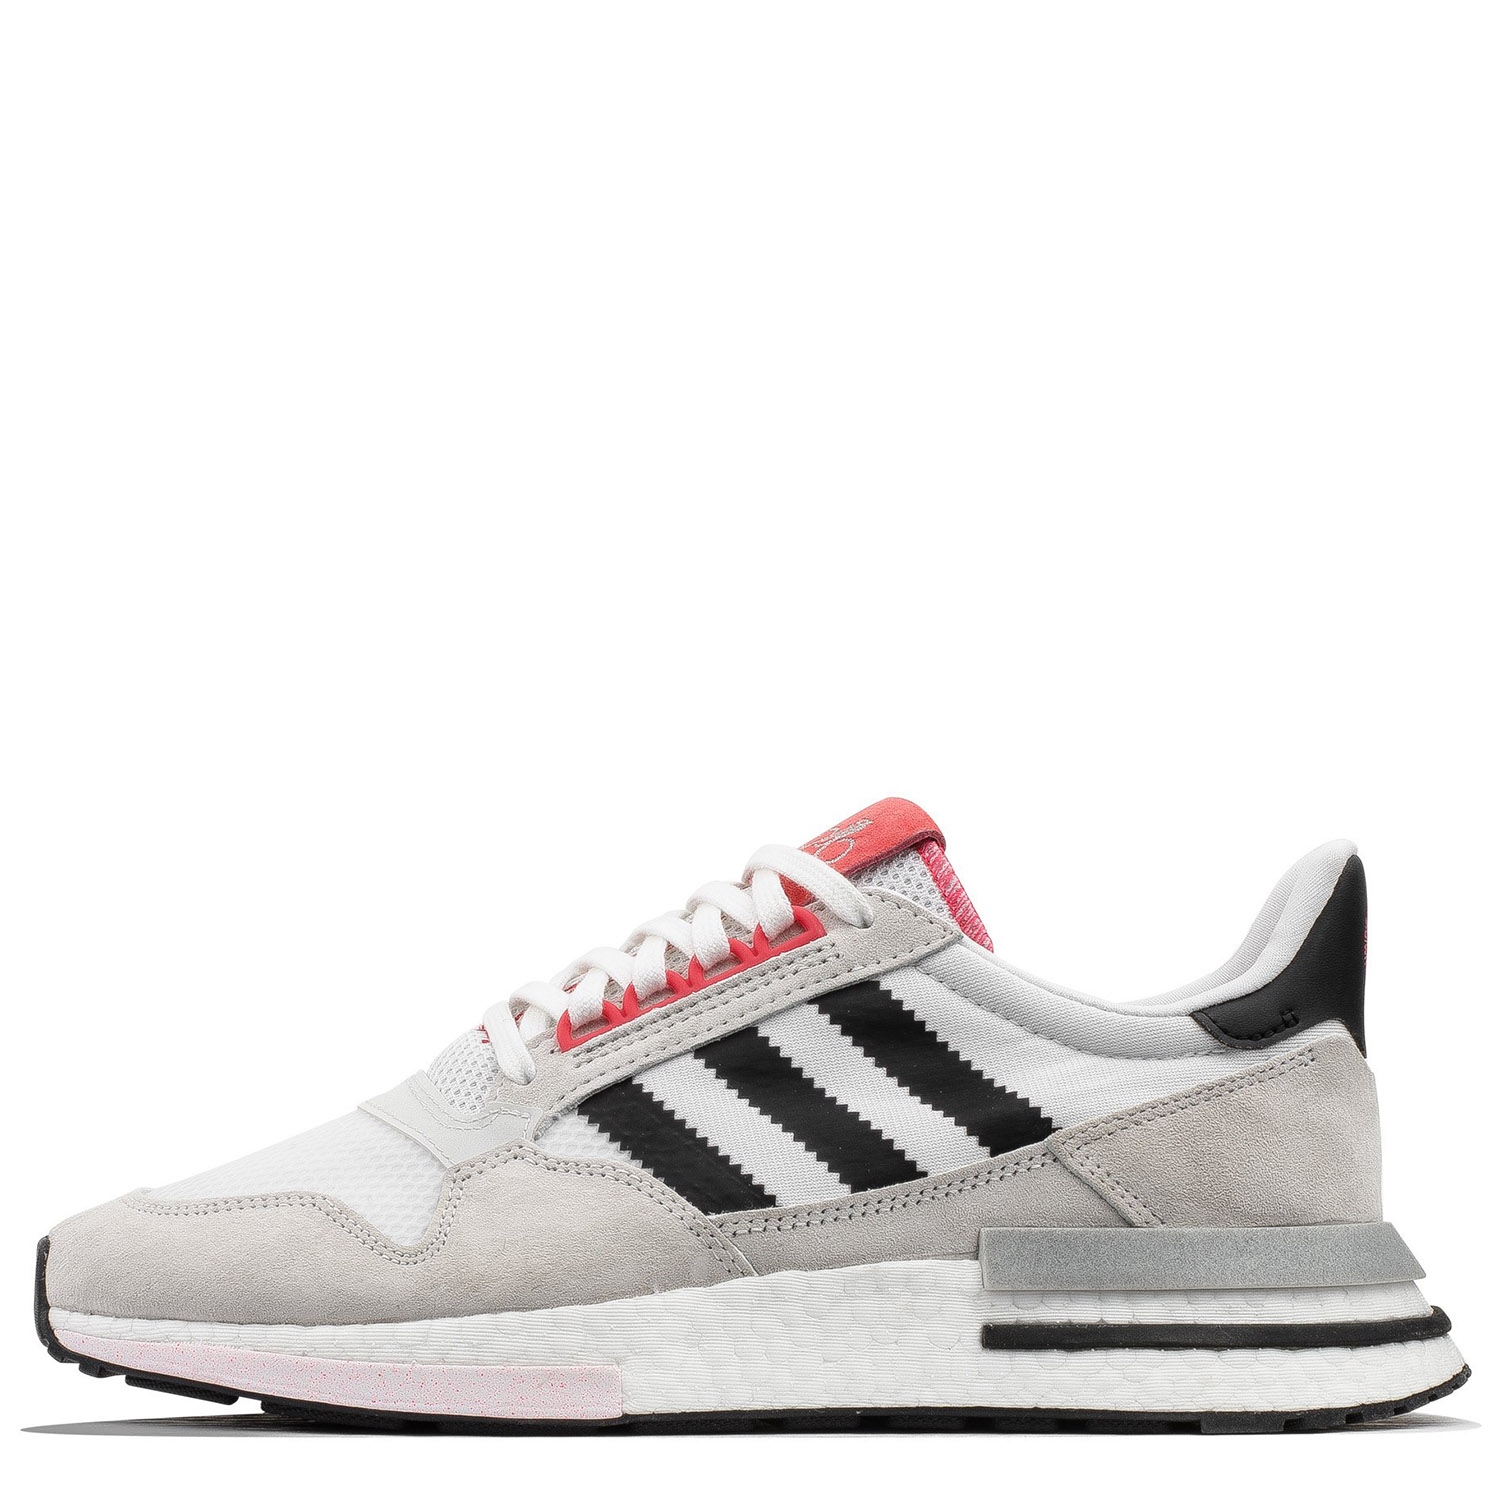 adidas Originals ZX 500 RM x Forever Bicycle FTWR WHITE / CORE BLACK / SHOCK RED